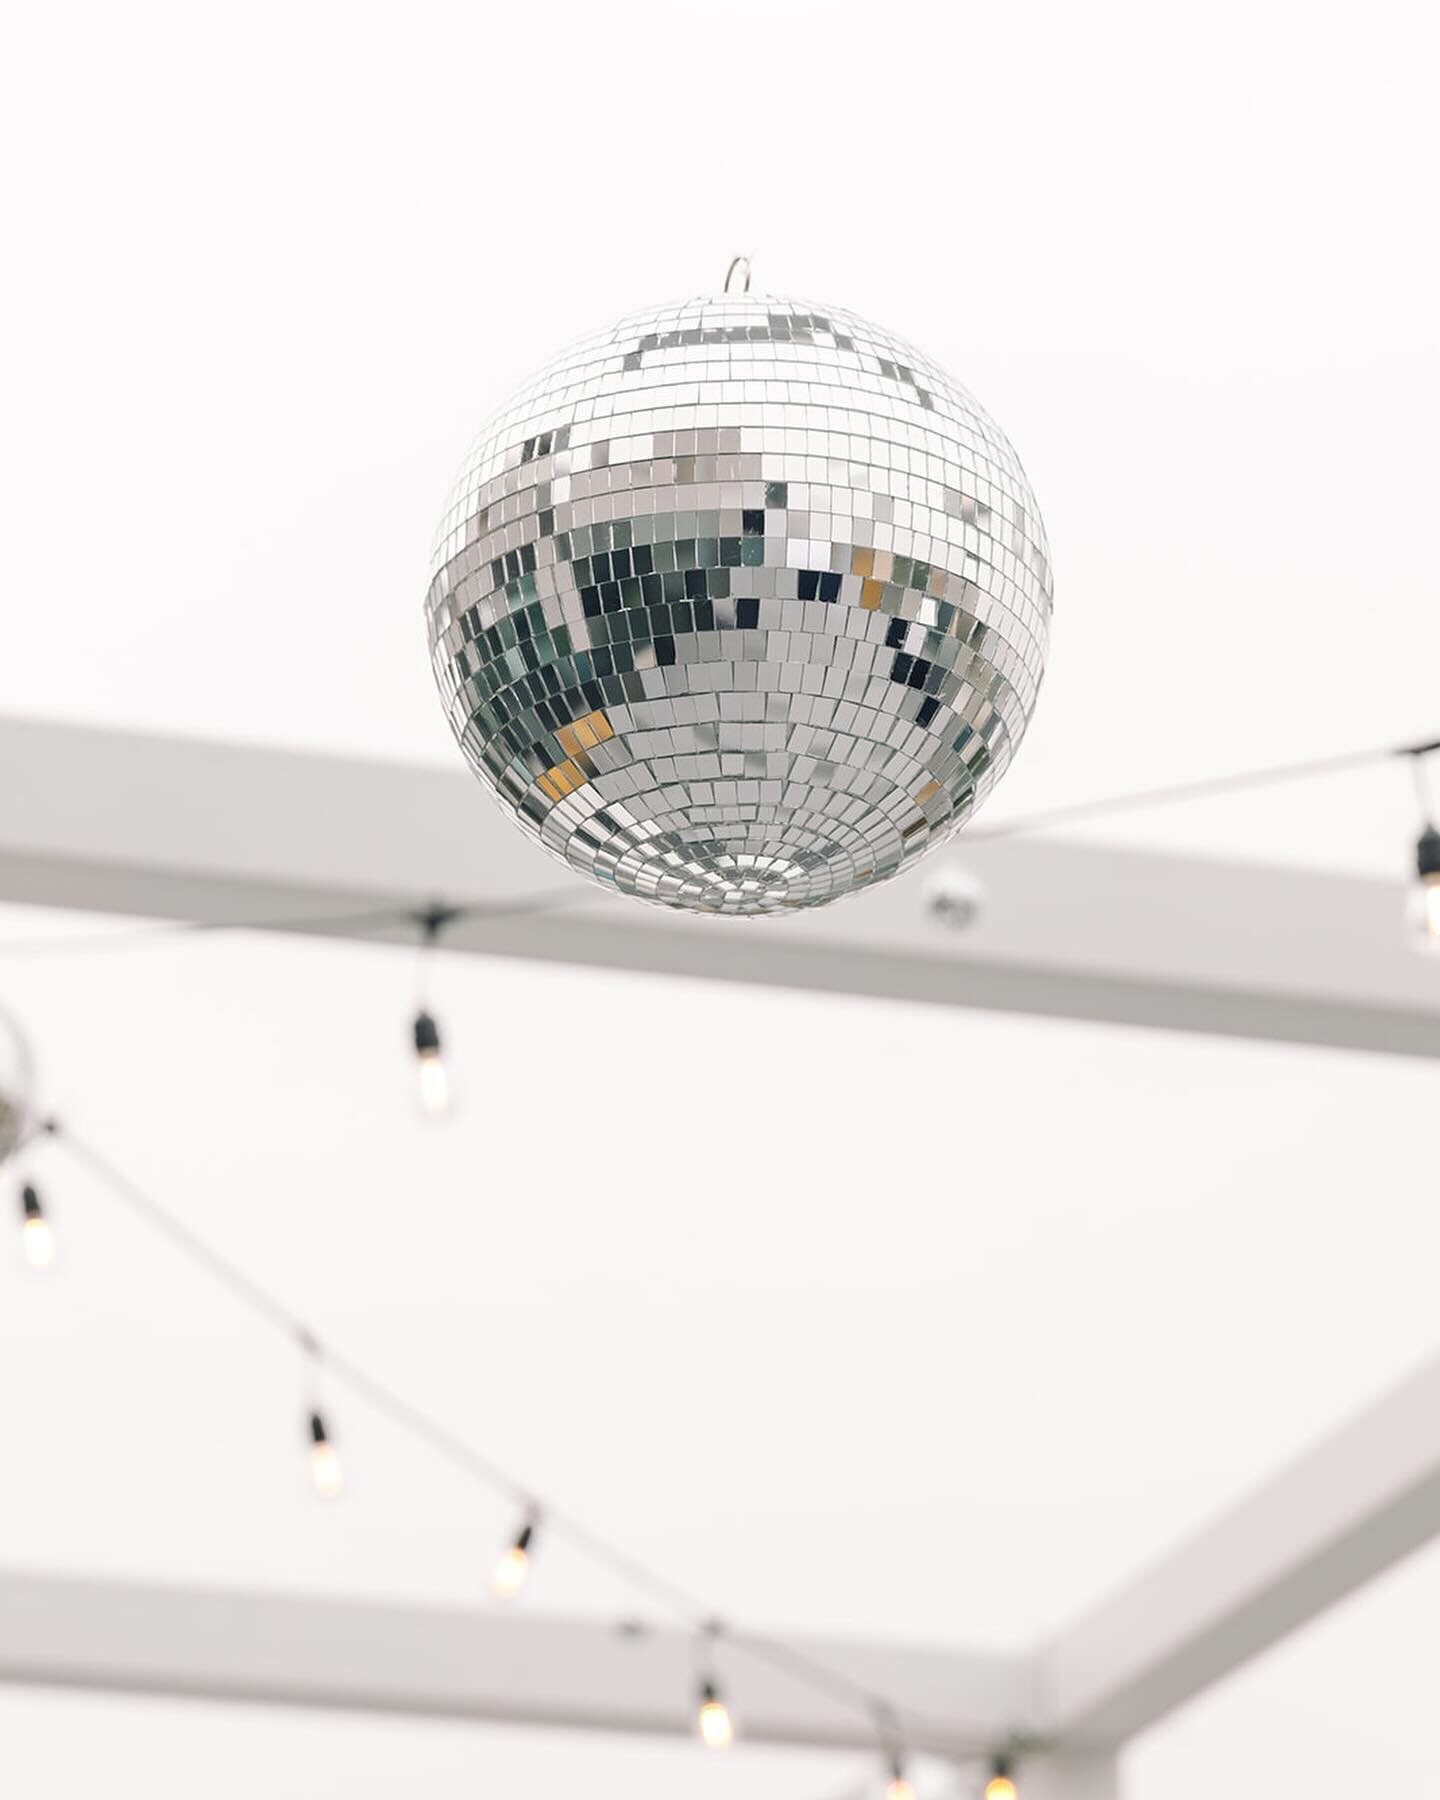 Hot take: disco balls might be the only decor that are just as much of a vibe during the day or night 🪩🕺🏻💃🏻🪩

Venue: @skyblurooftopbar 
Photographer: @black.iris.photos
Food: @curryupnow @tacotaxicompany @butter_and_saffron
Decor: @ayalaballoon